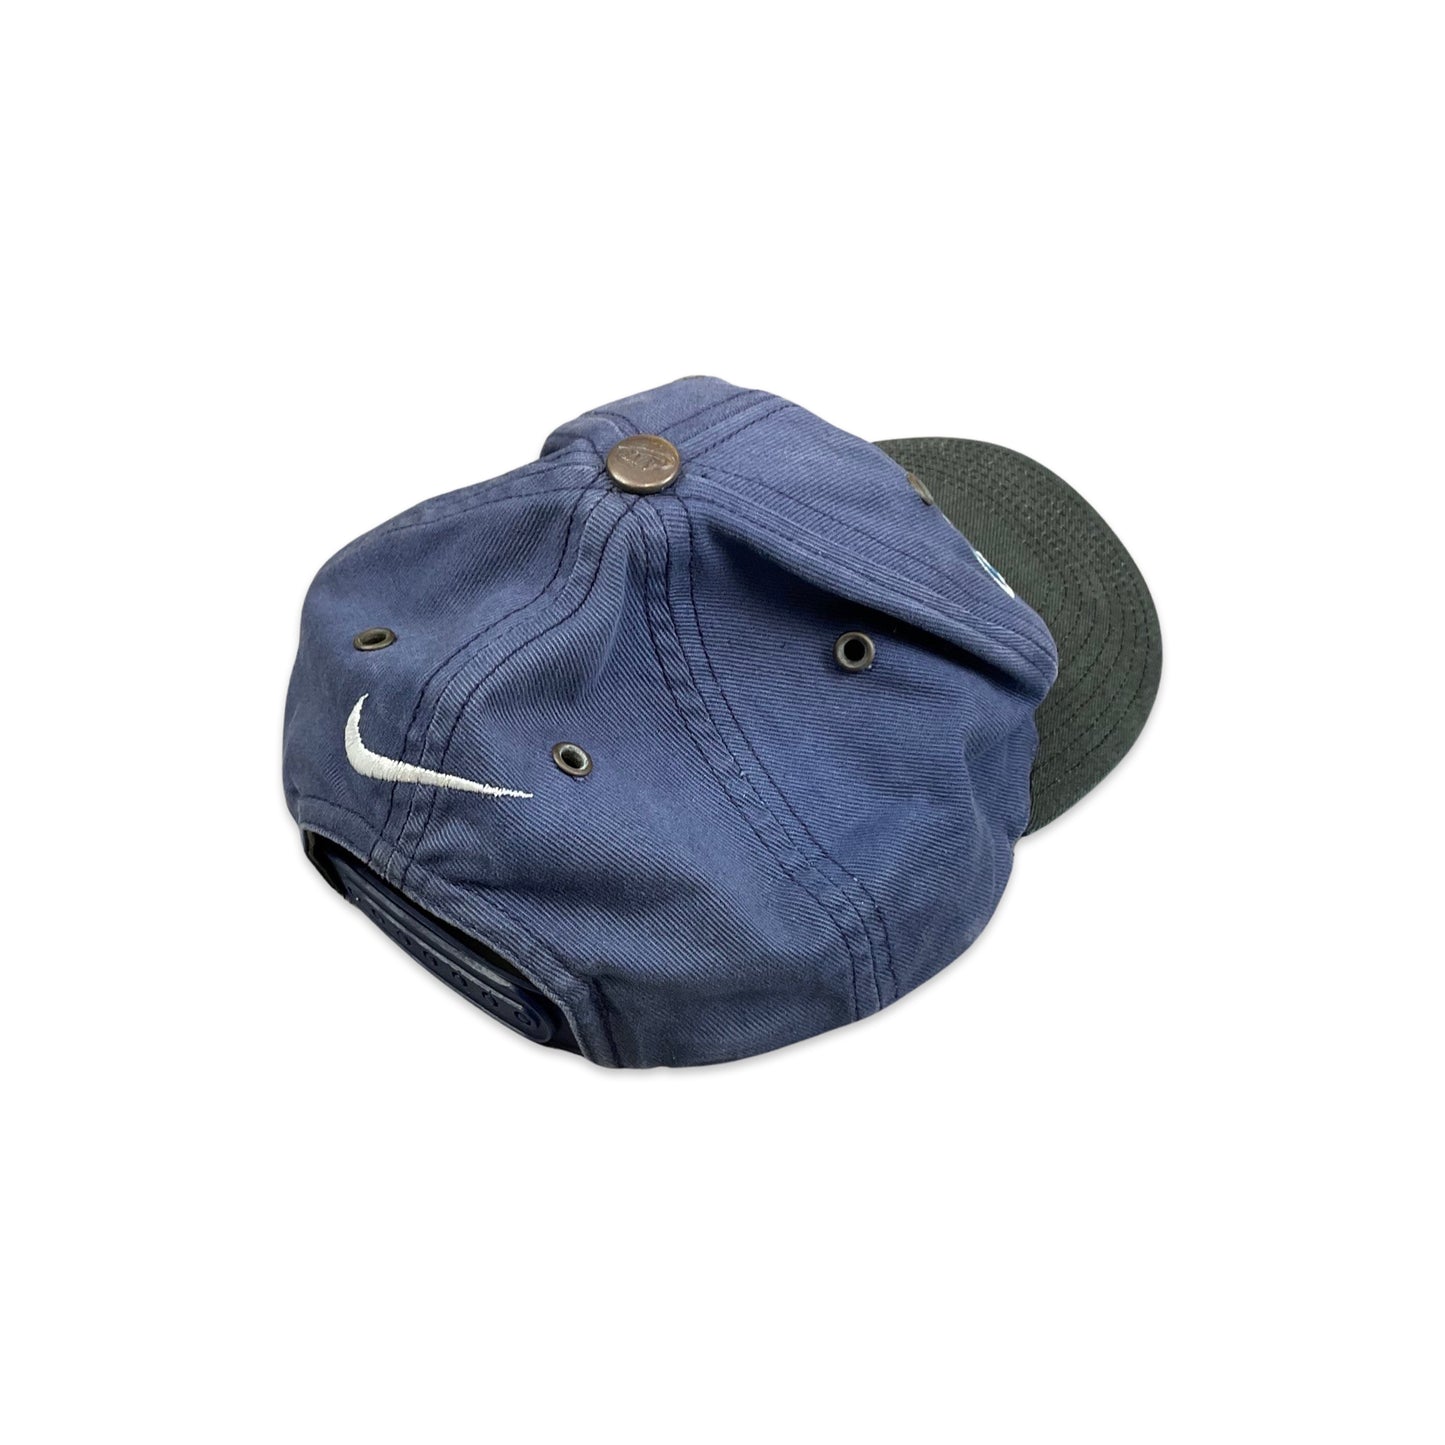 Vintage 90s Navy Nike Spell Out Cap